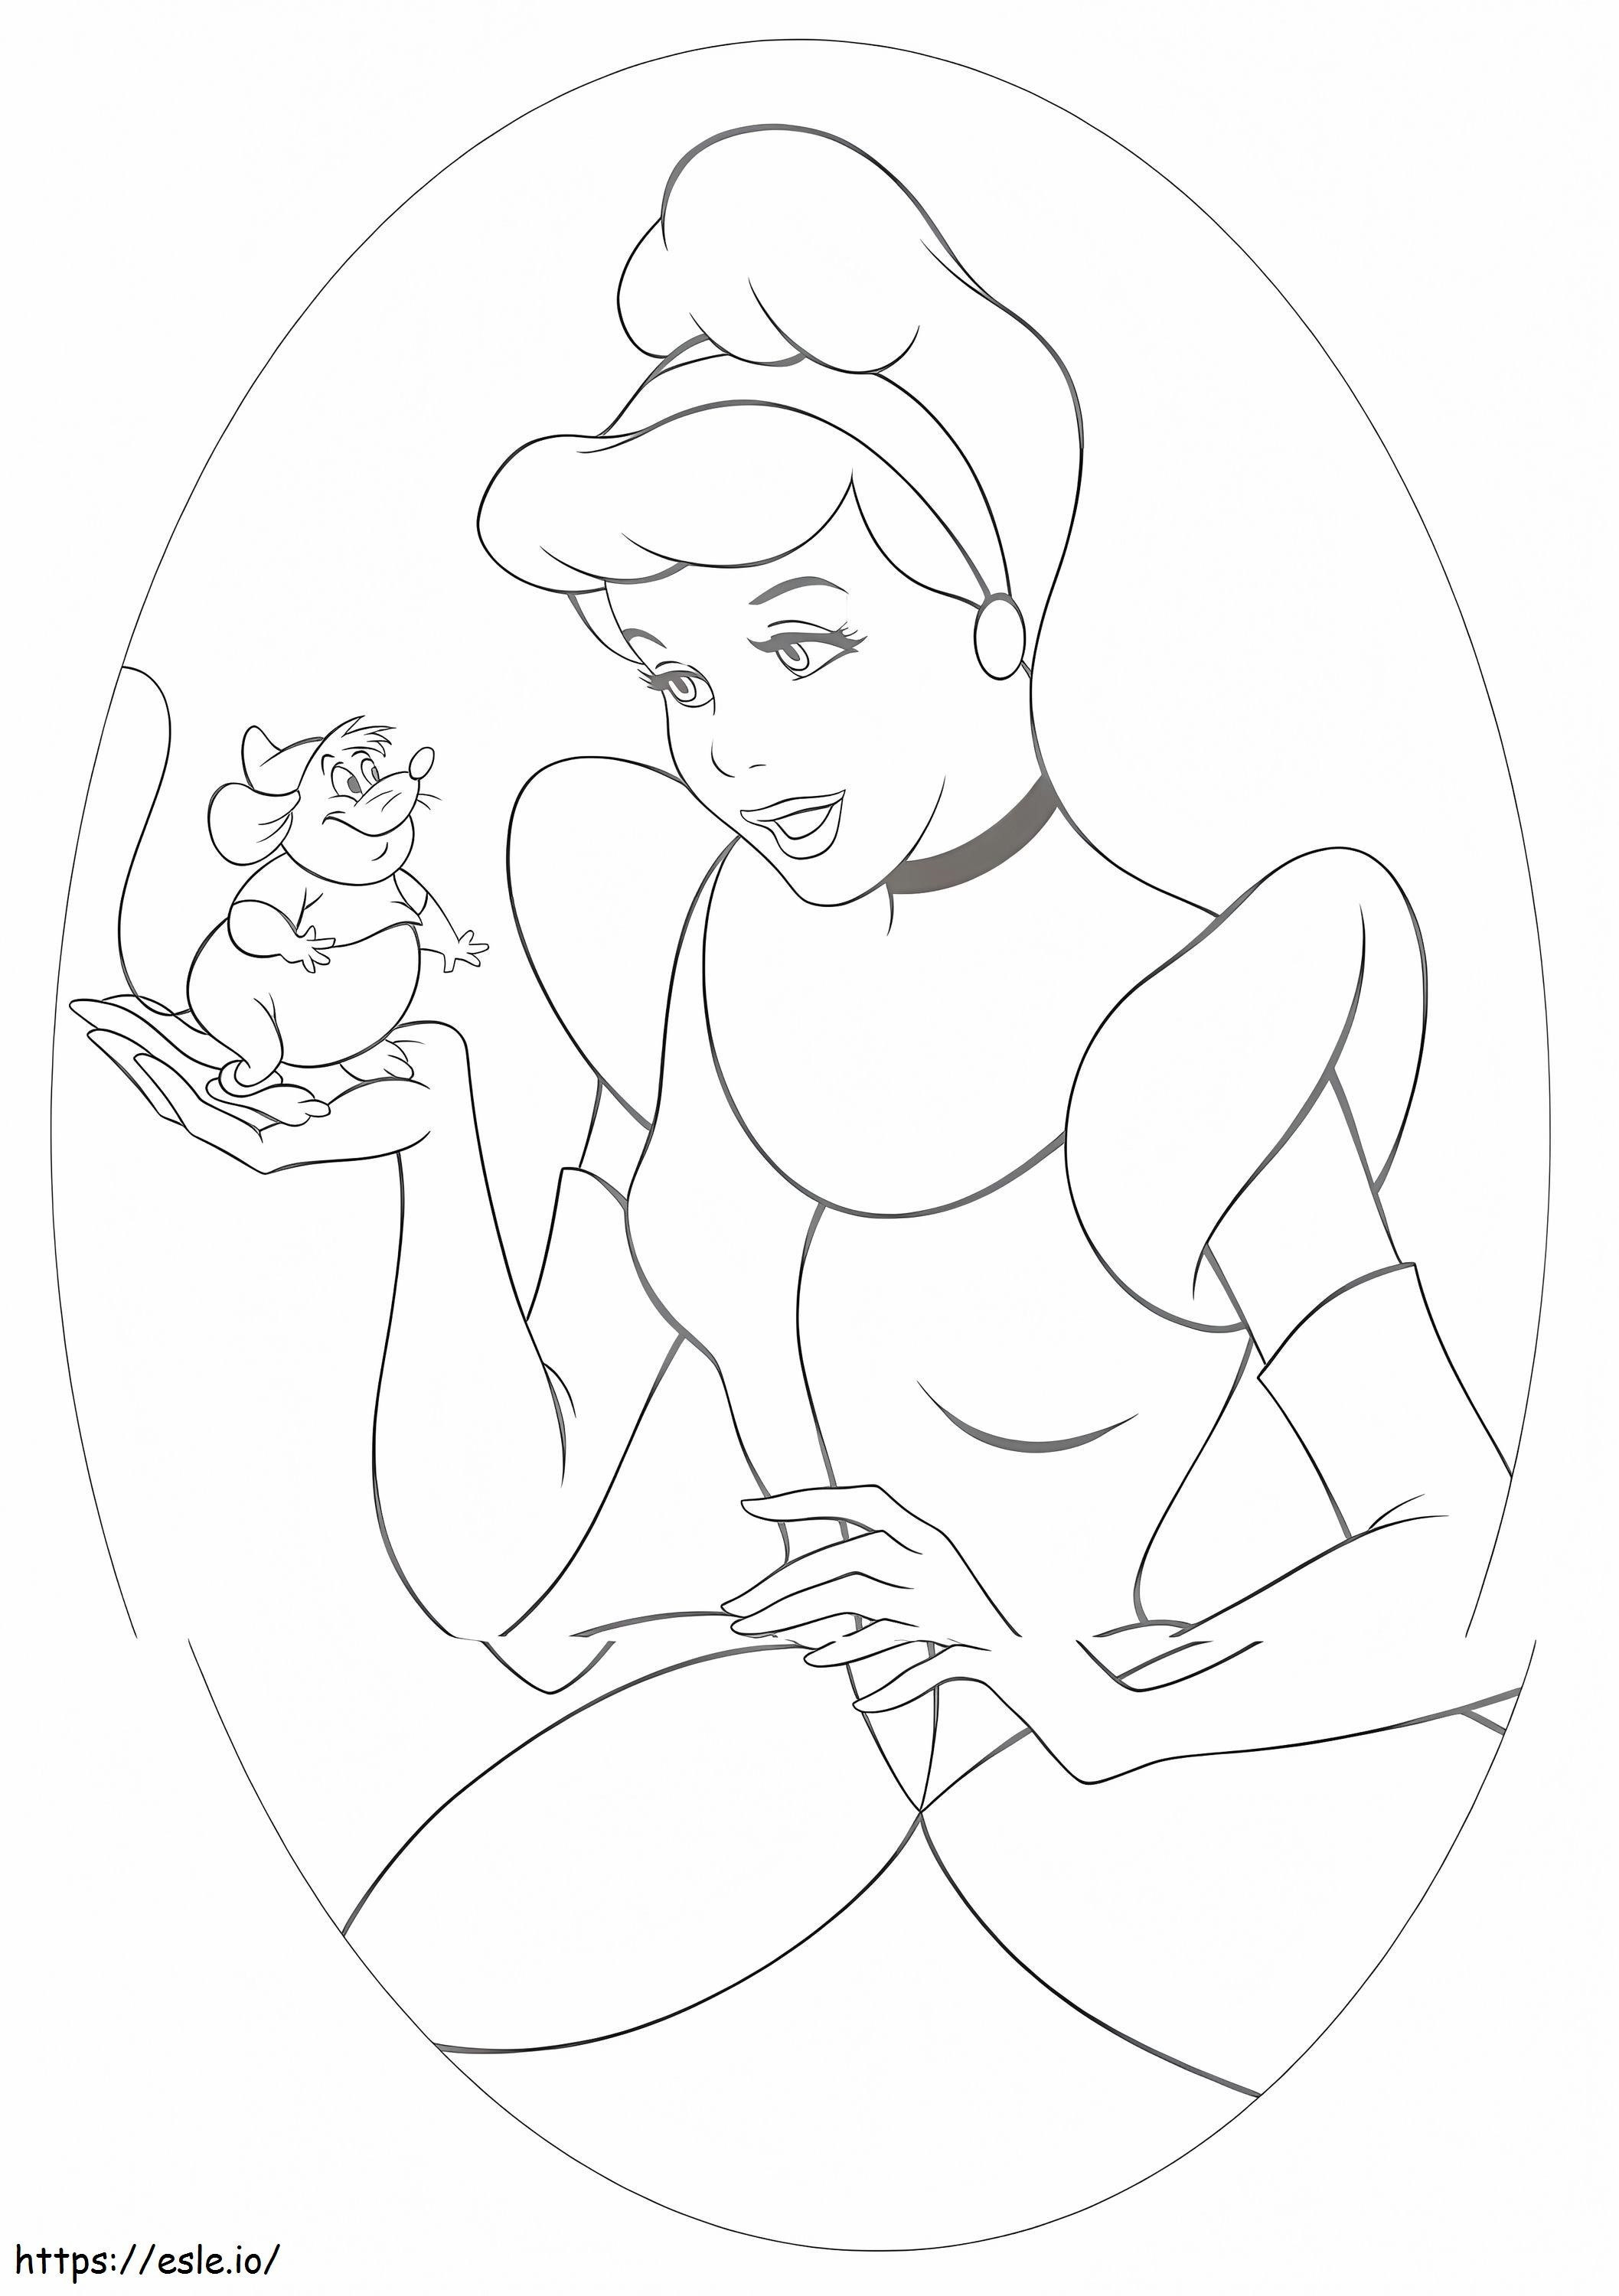 Cinderella And Gus coloring page